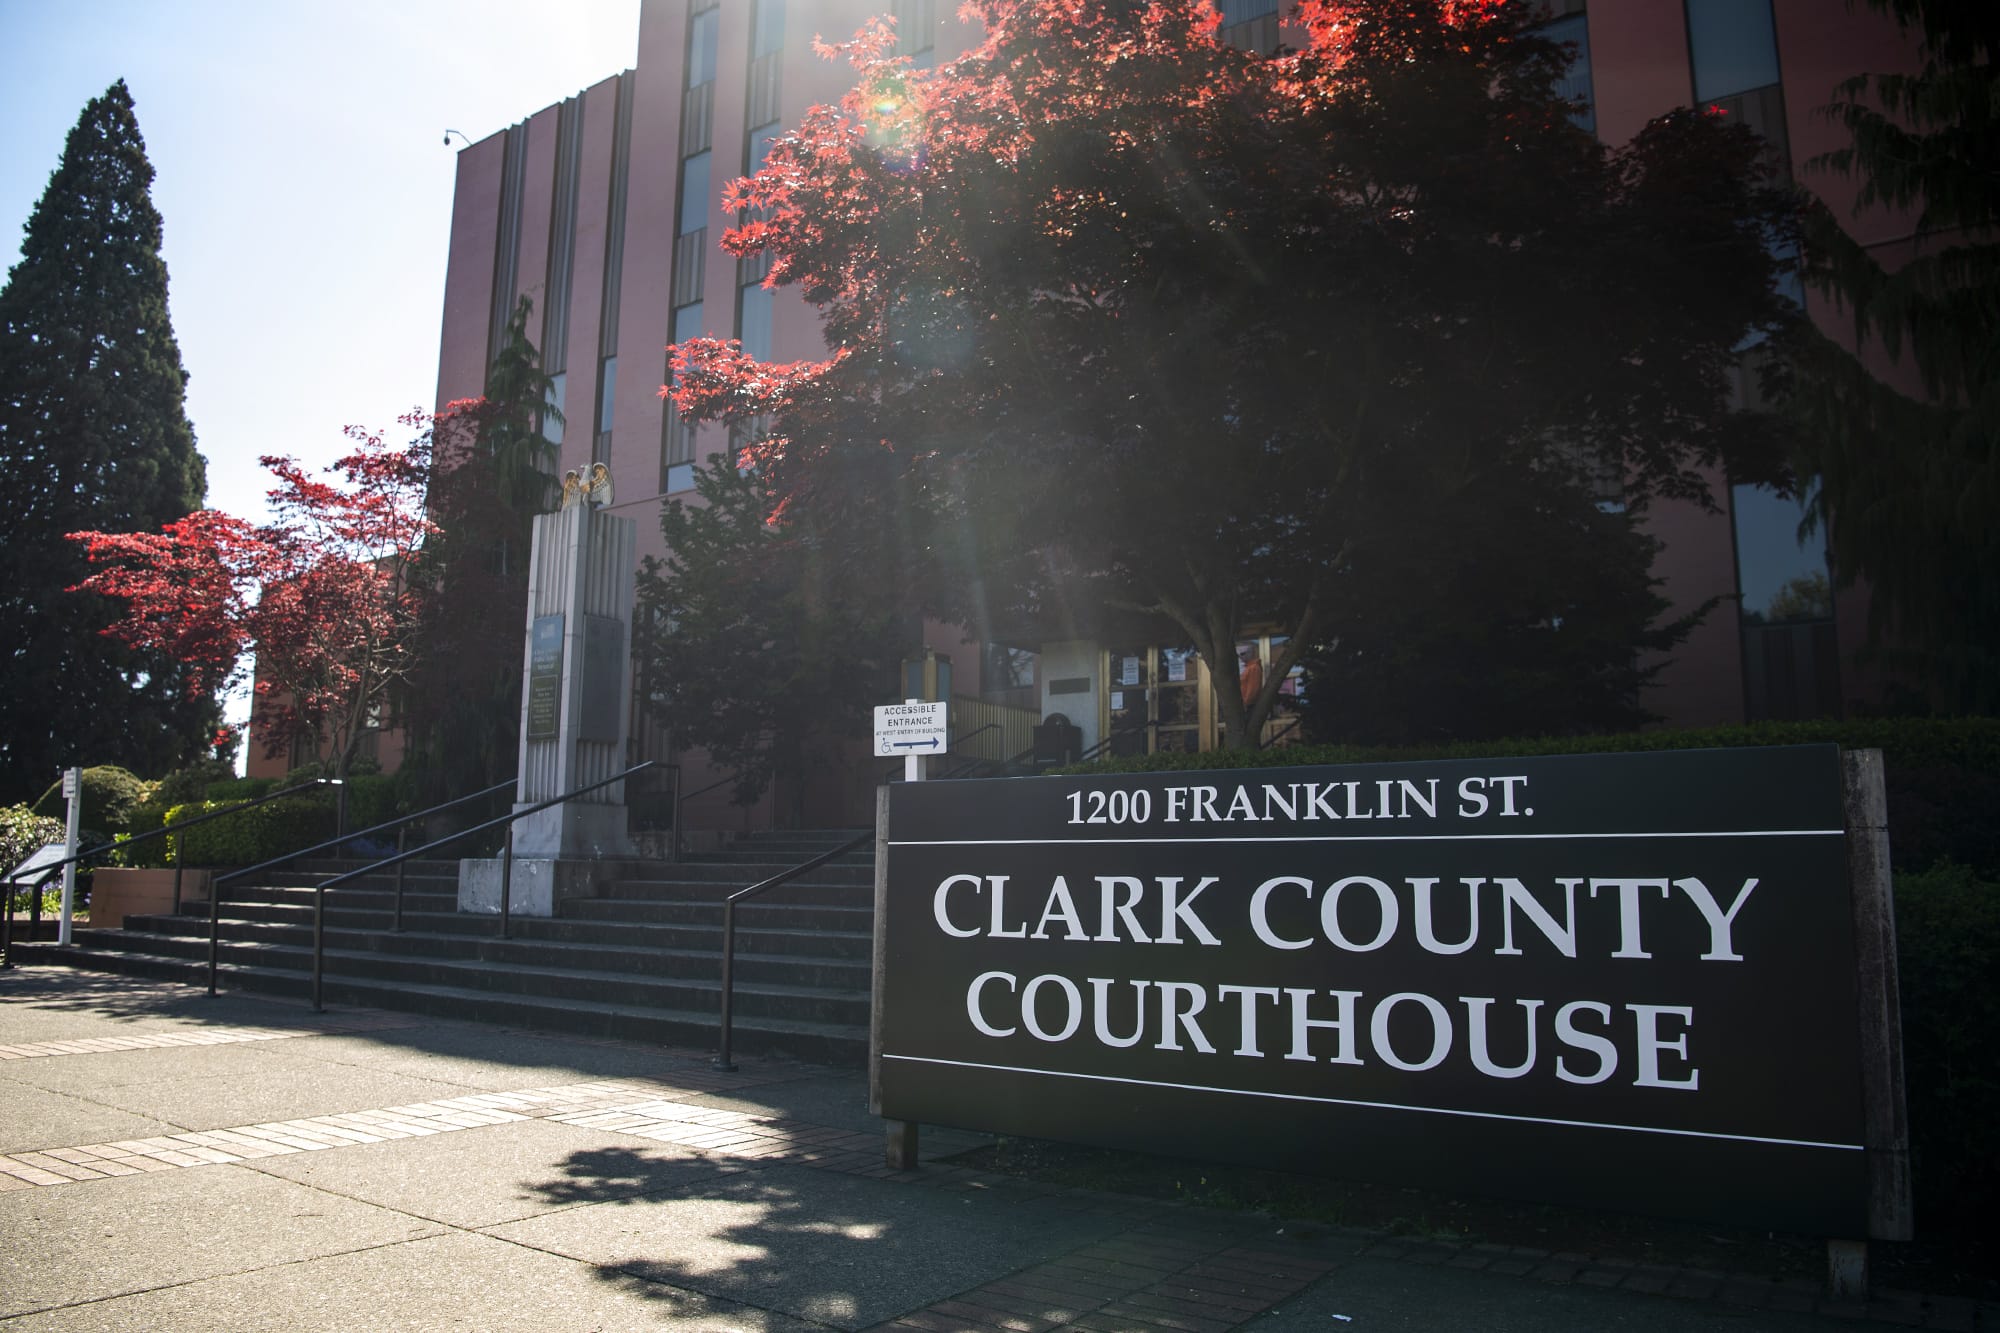 The Clark County Courthouse.